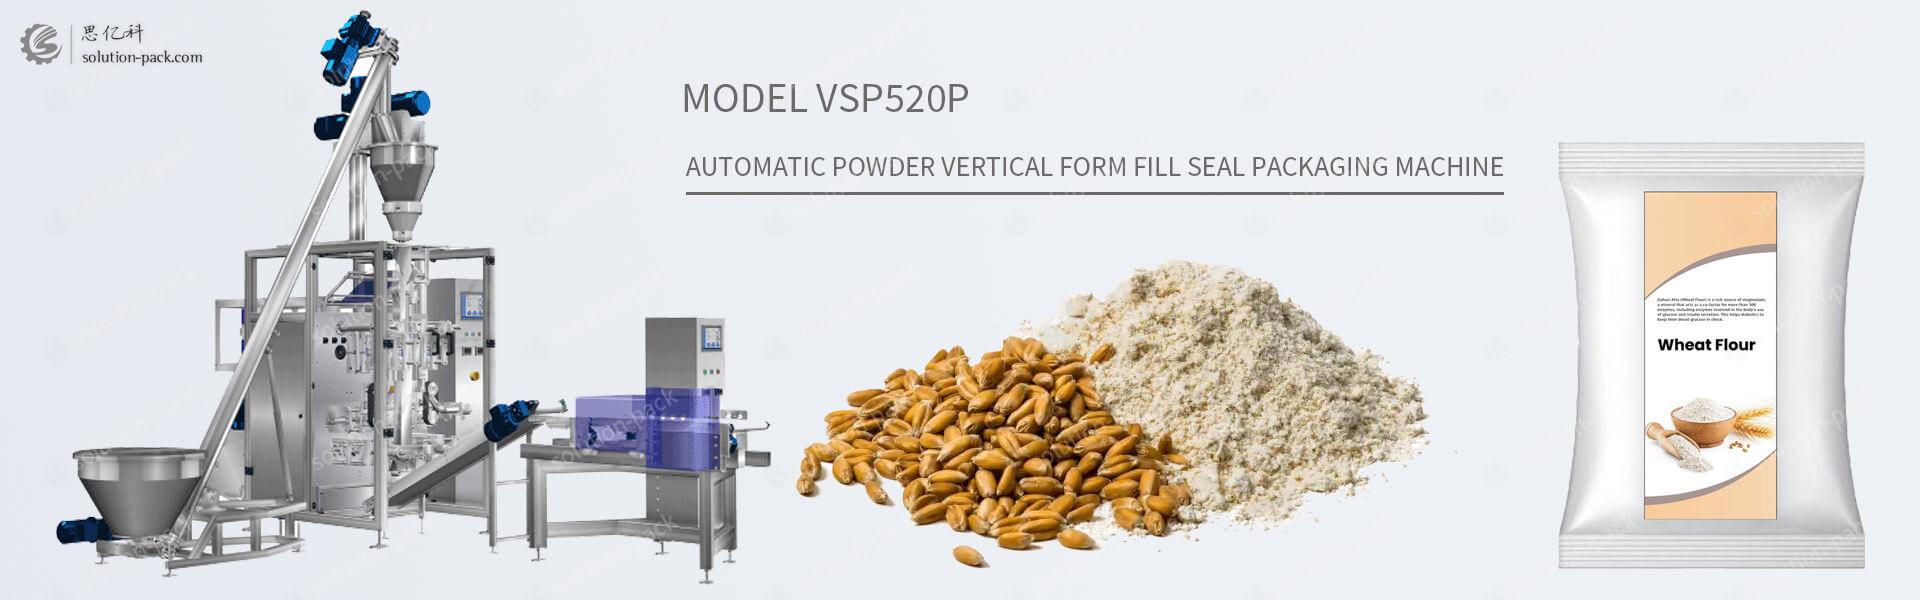 Solution-Pack | Model VSP520P Automatic Vertical Packaging Machine Solution | Powder Vertical Form Fill Seal Machine | VFFS Packing Machine | Powder Packing Machine